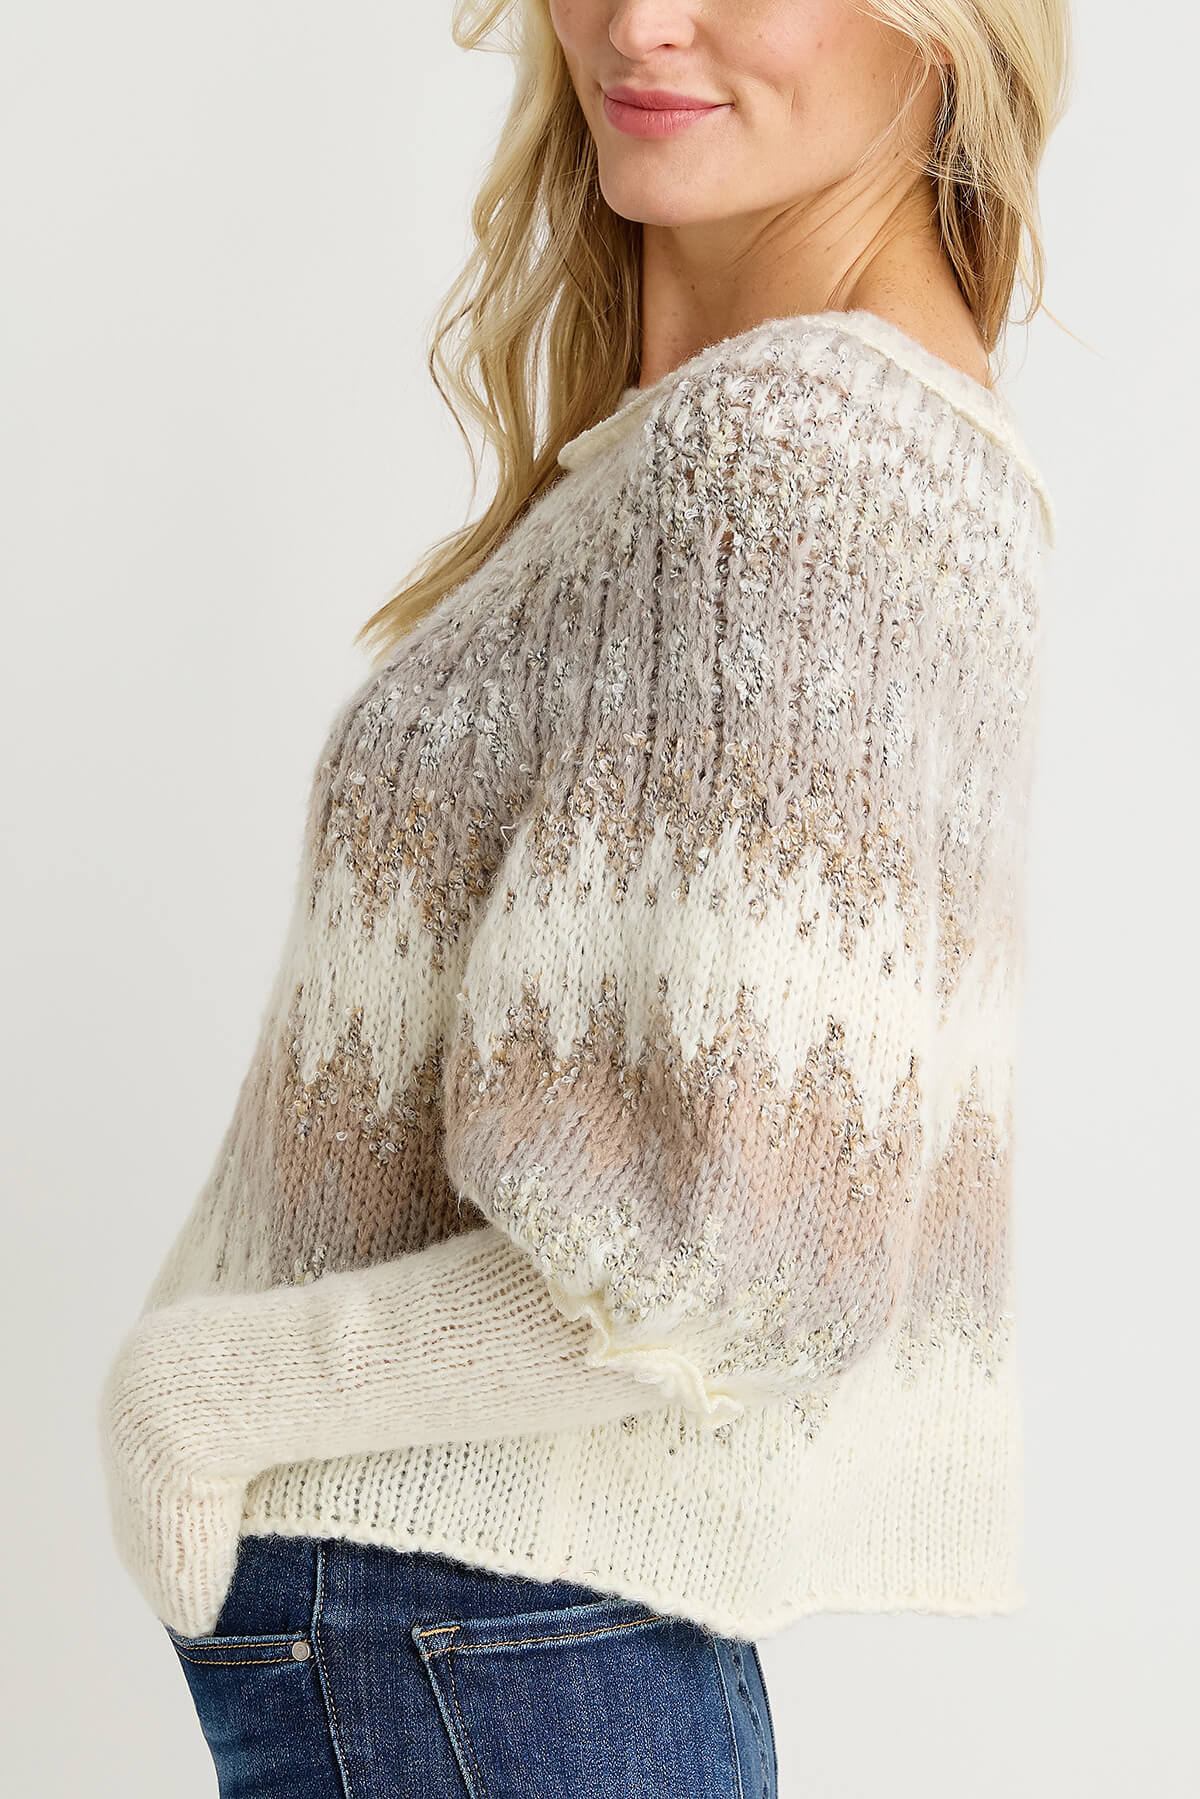 Free People Home for The Holidays Sweater